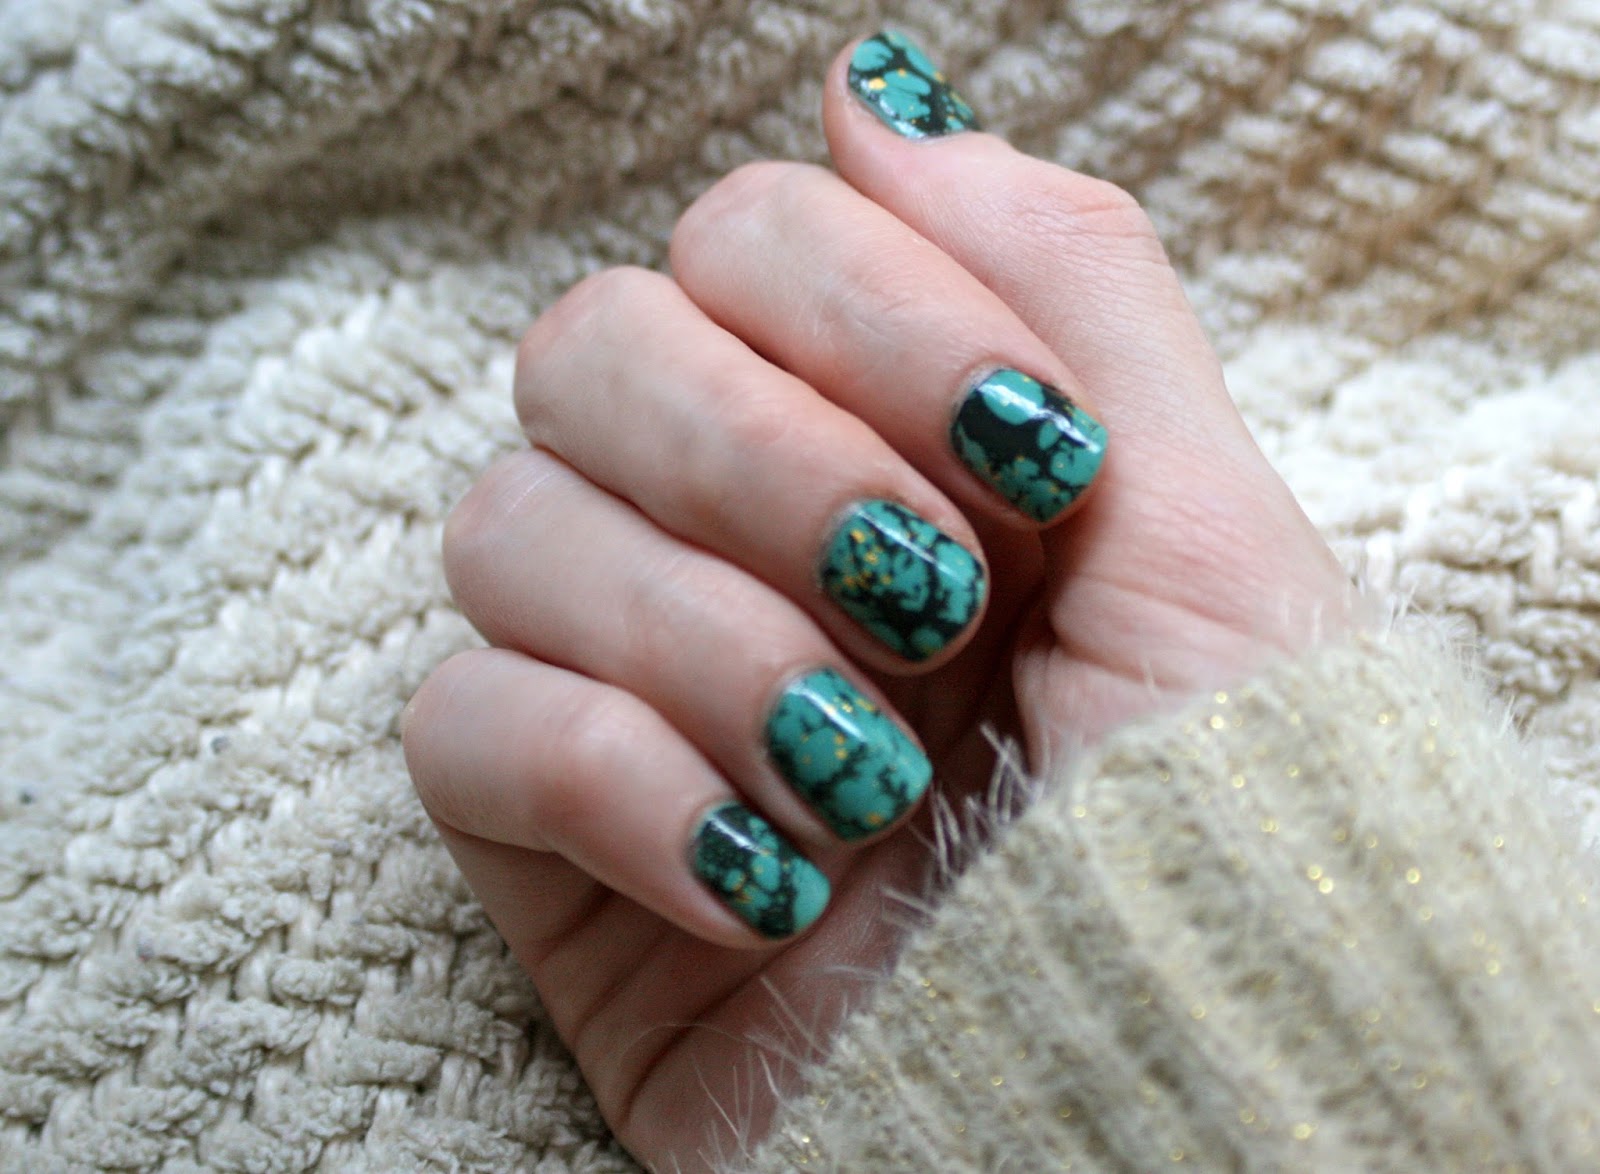 1. Turquoise and Gold Nail Art Design - wide 1